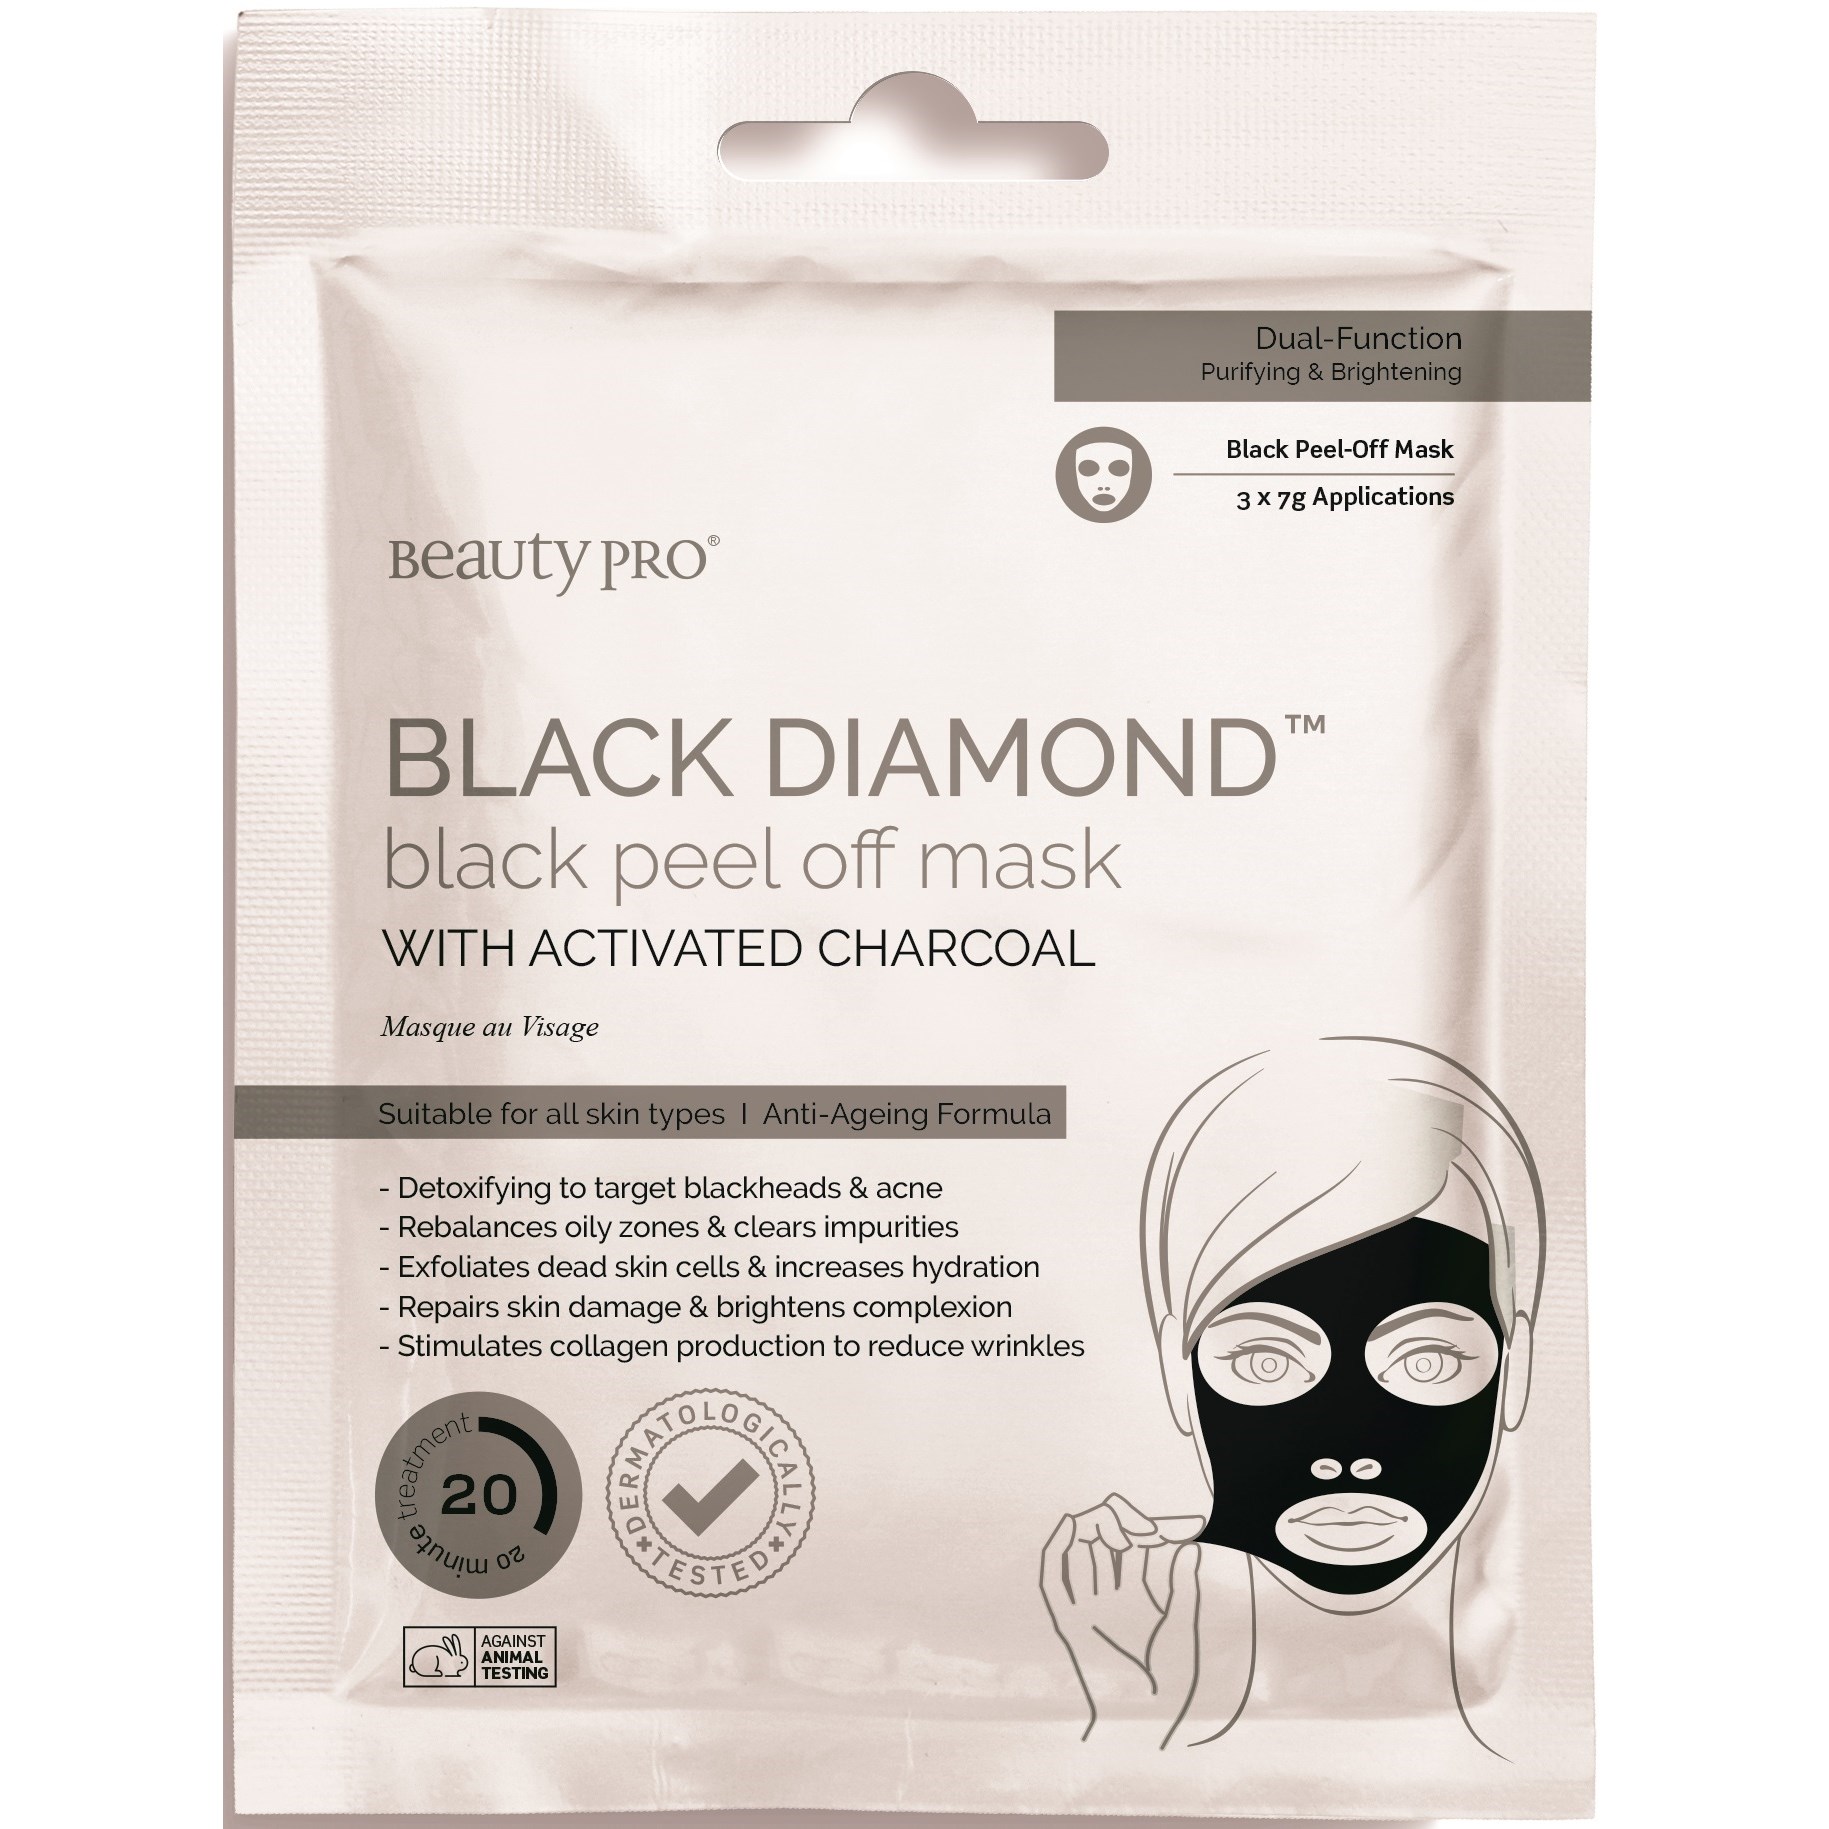 Läs mer om Beauty PRO Black Diamond Black Peel-Off Mask With Activated Charcoal